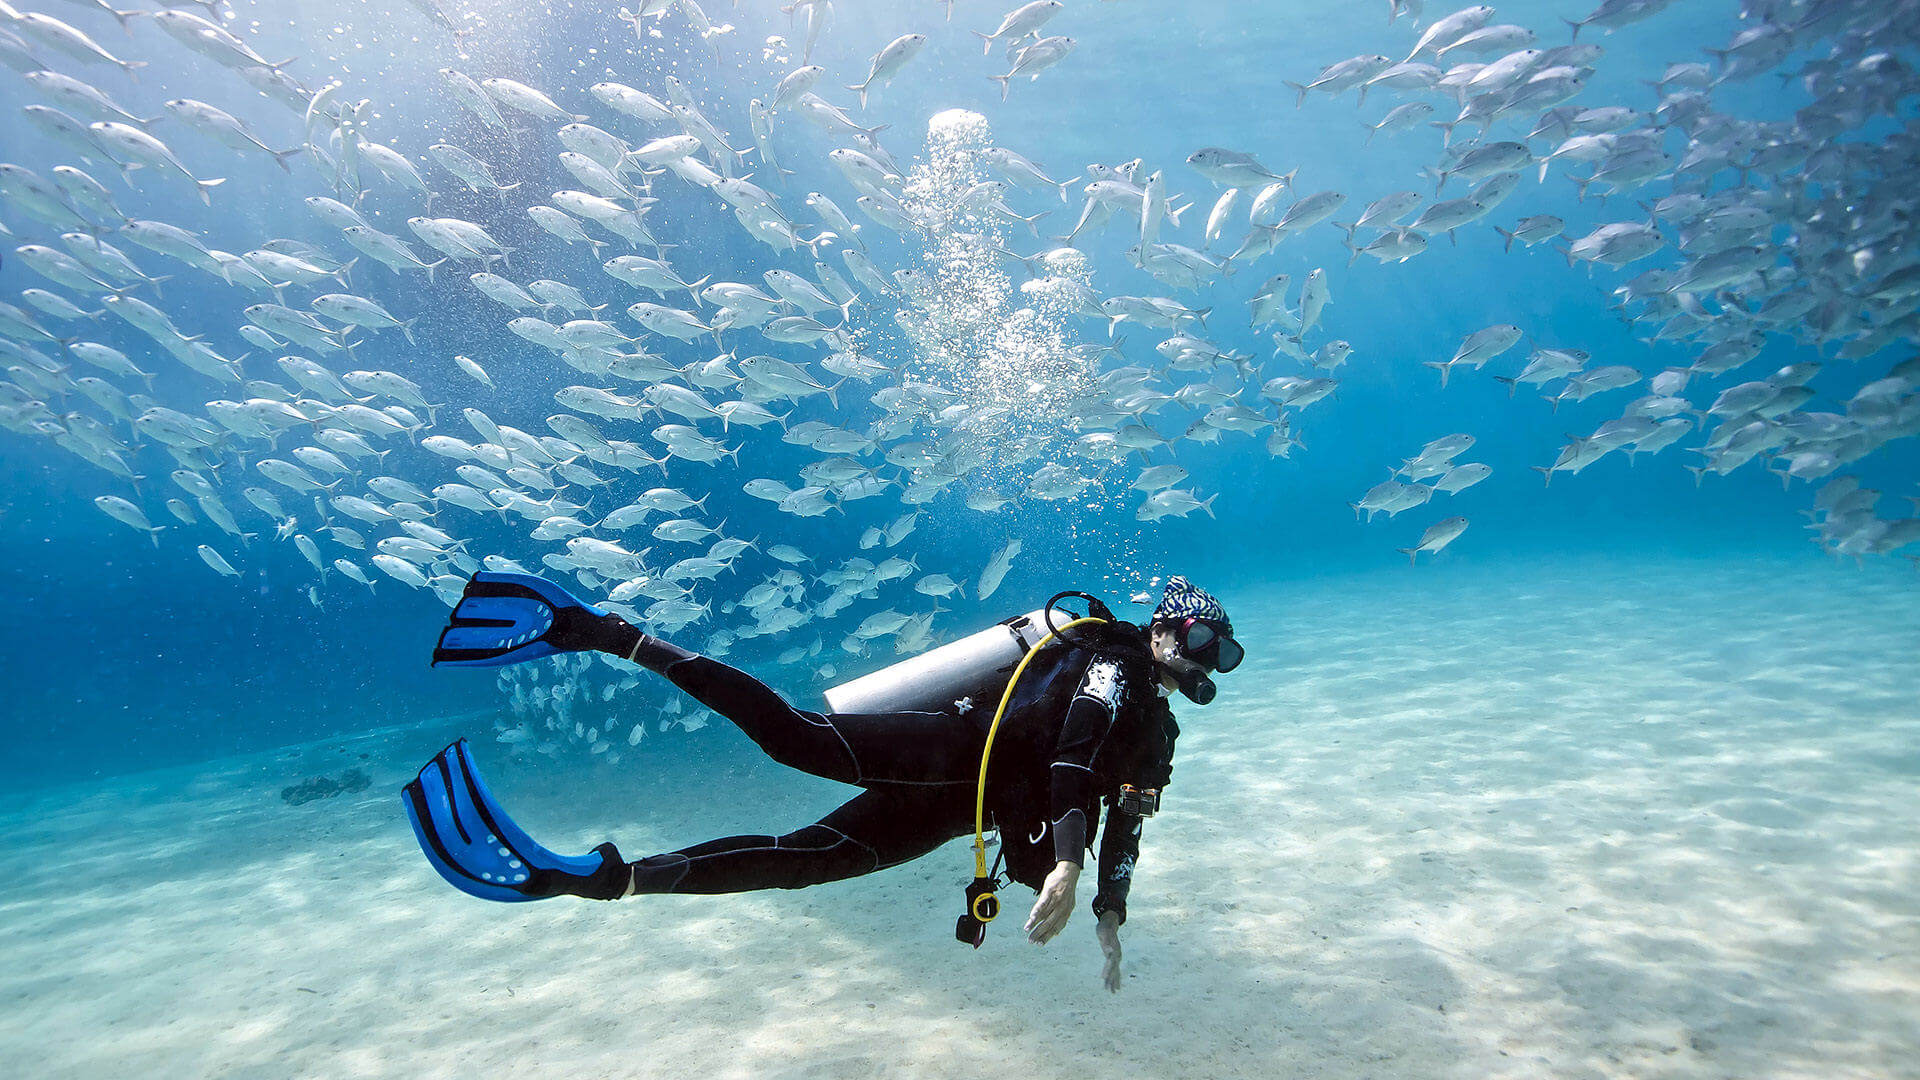 Fitness and Health for Diving - Are You Fit For Diving?